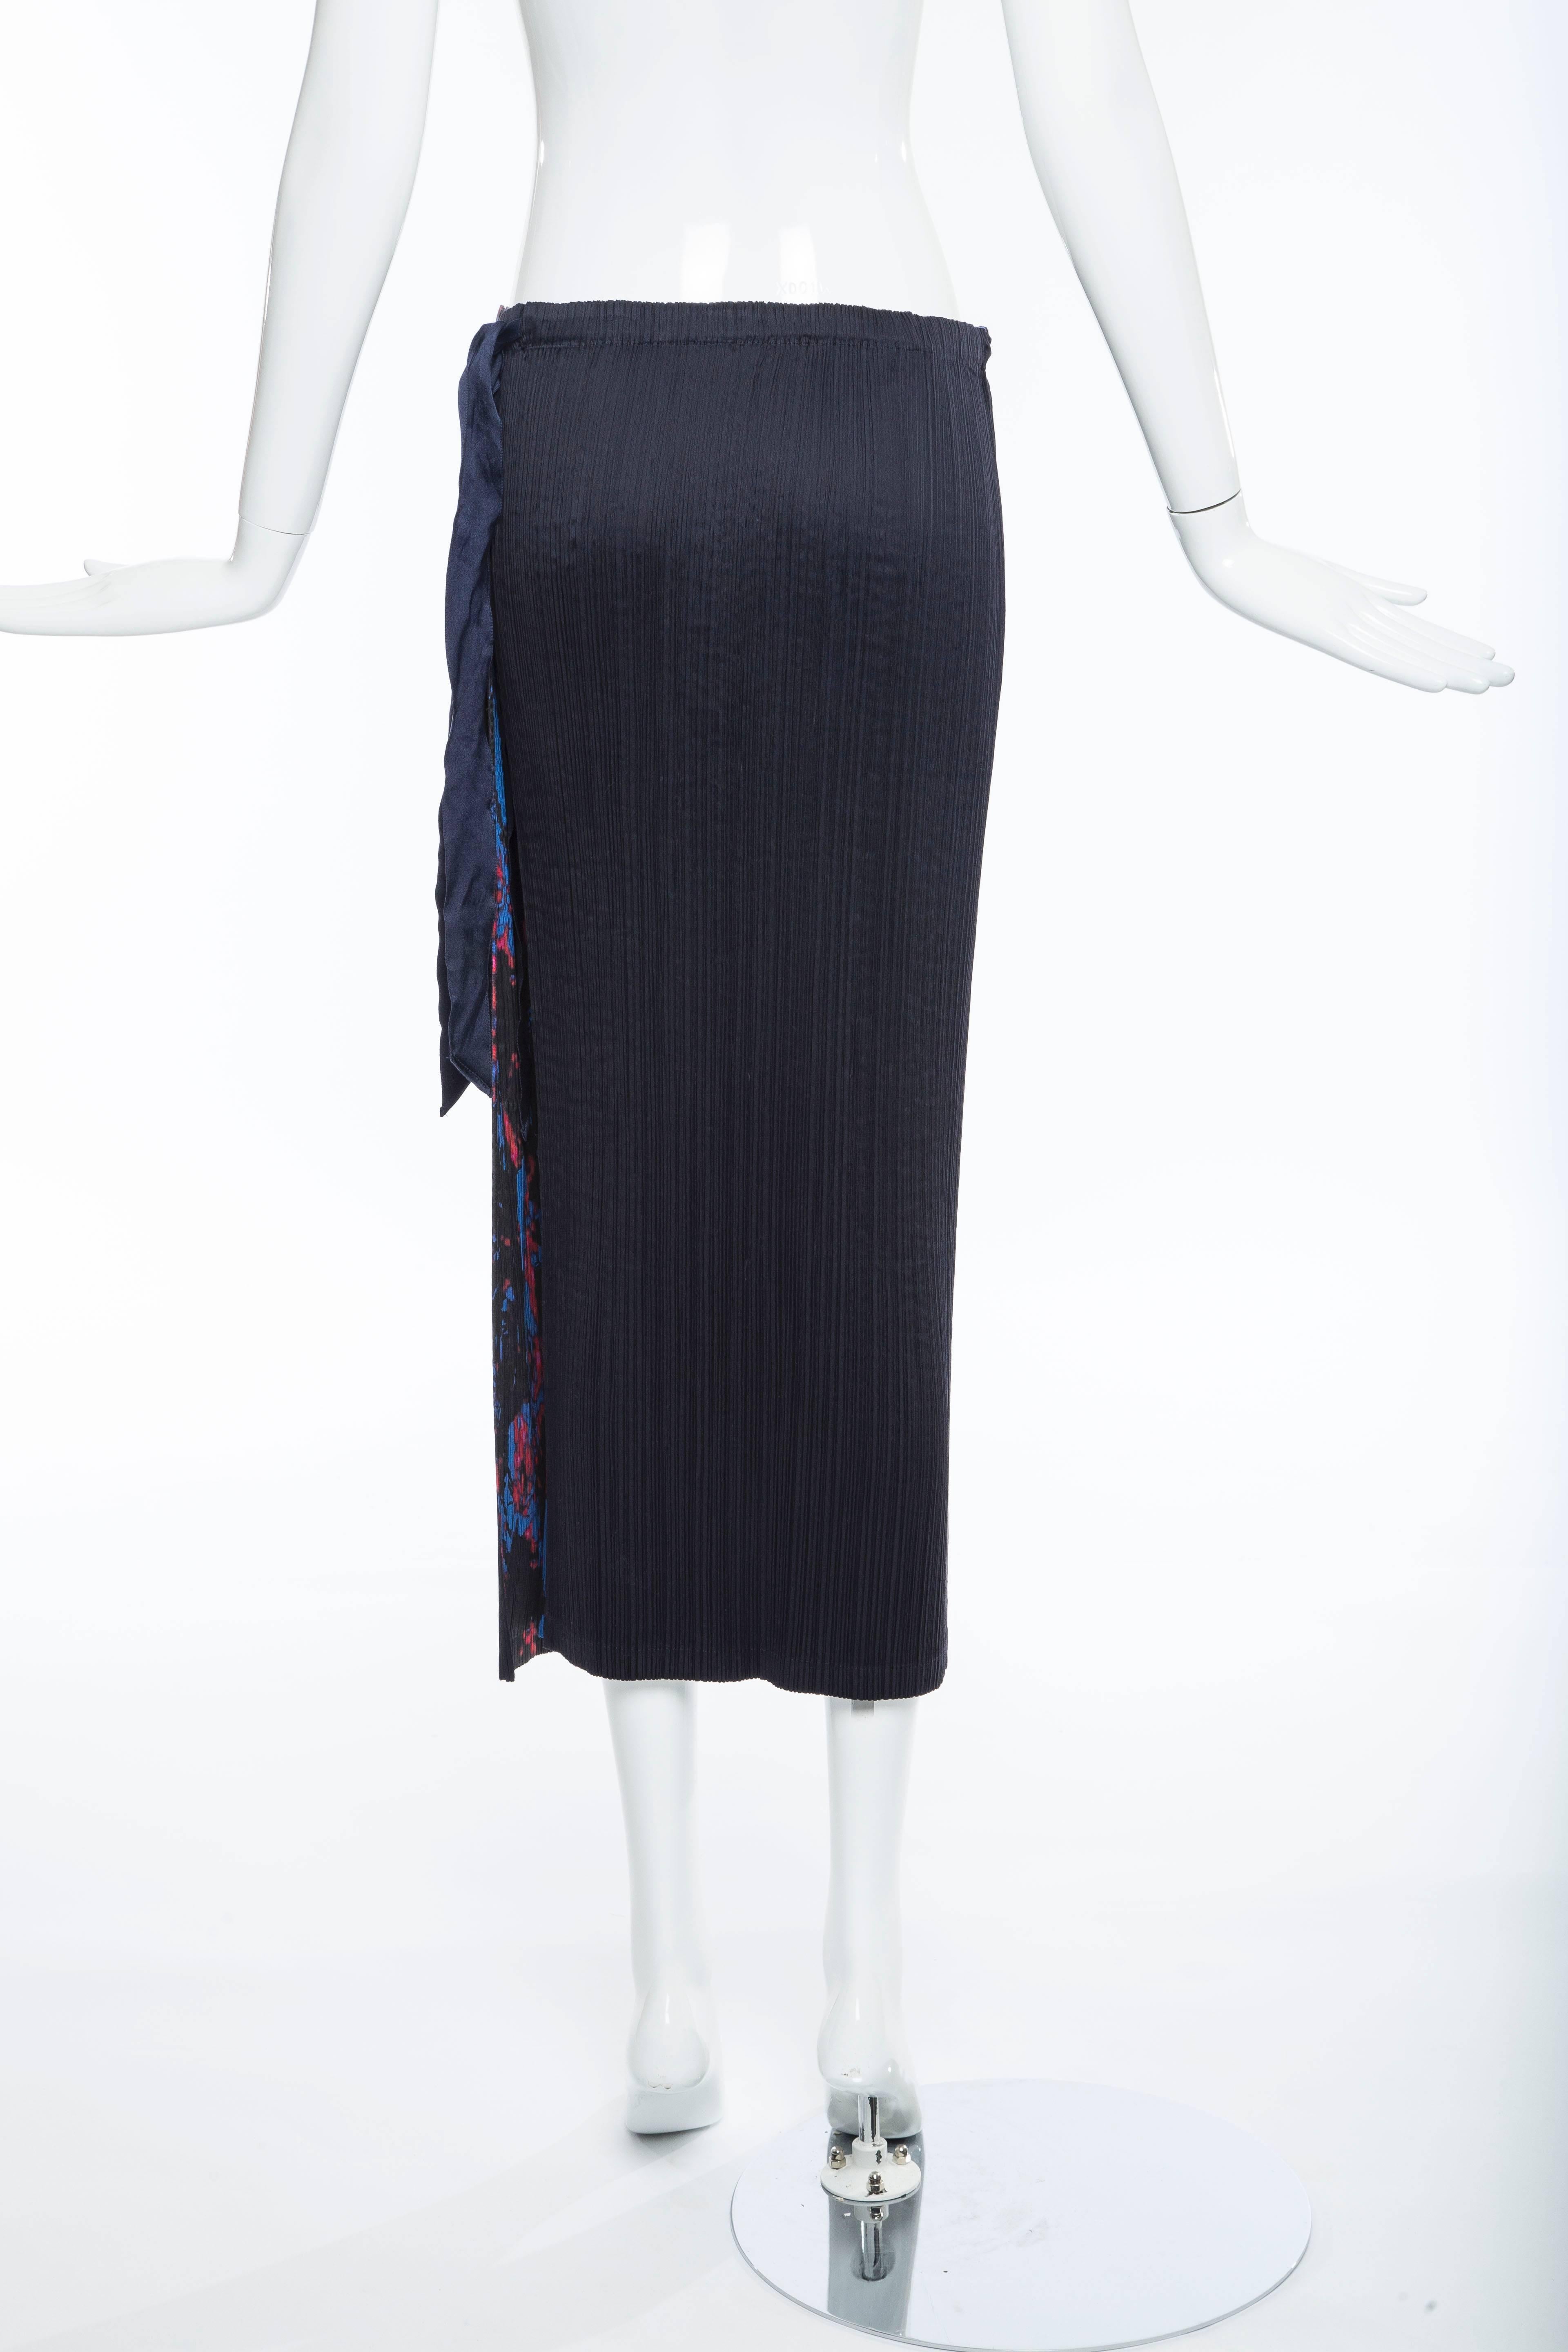 Issey Miyake Navy Blue Printed Silk Pleated Skirt,  Spring 2007 For Sale 3